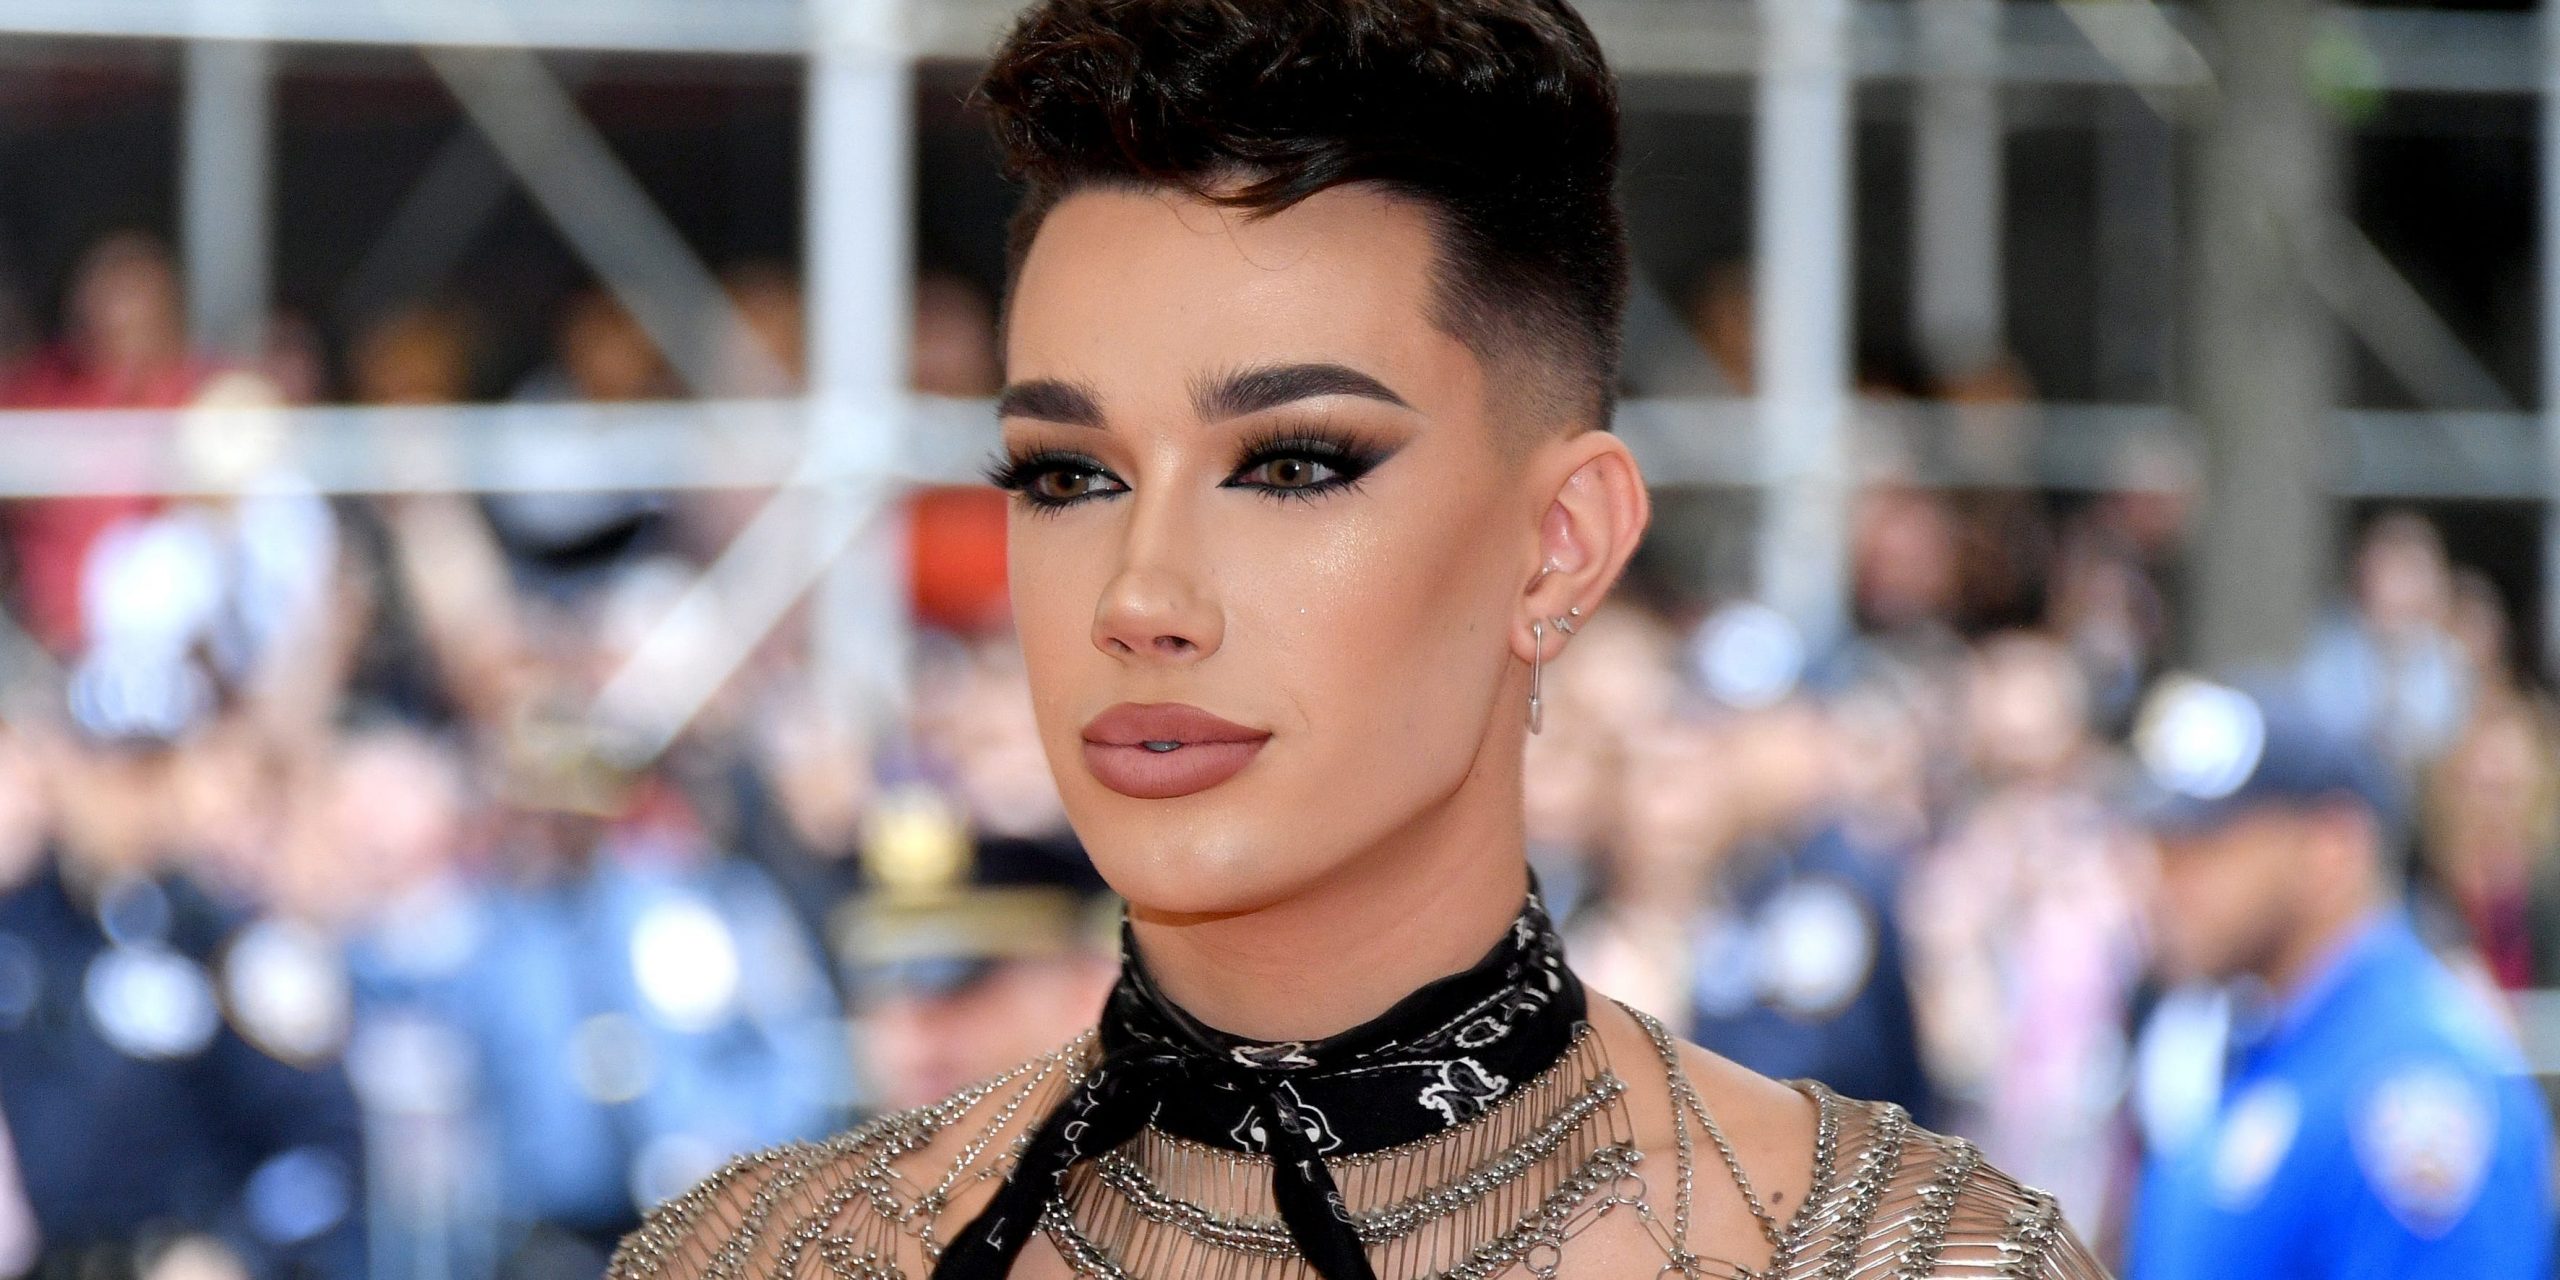 James Charles spoke to Campbell about what it was like to attend the Met Gala in 2019.